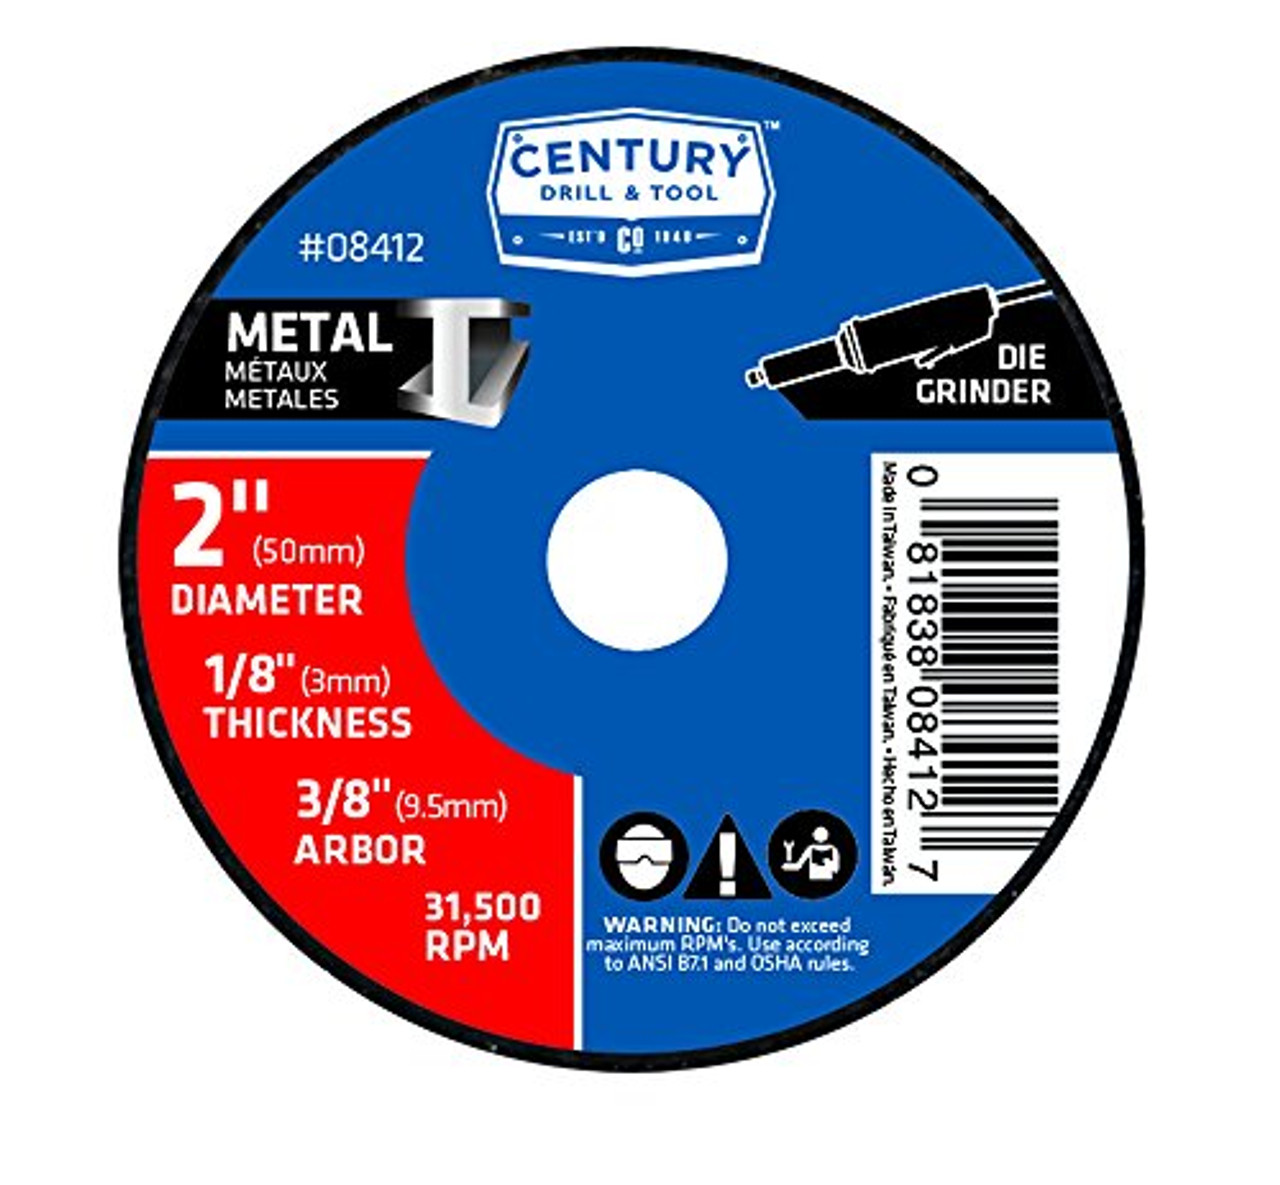 Century Drill & Tool 8412 Metal Abrasive Cutting and Grinding Wheel, 2" by 1/8"